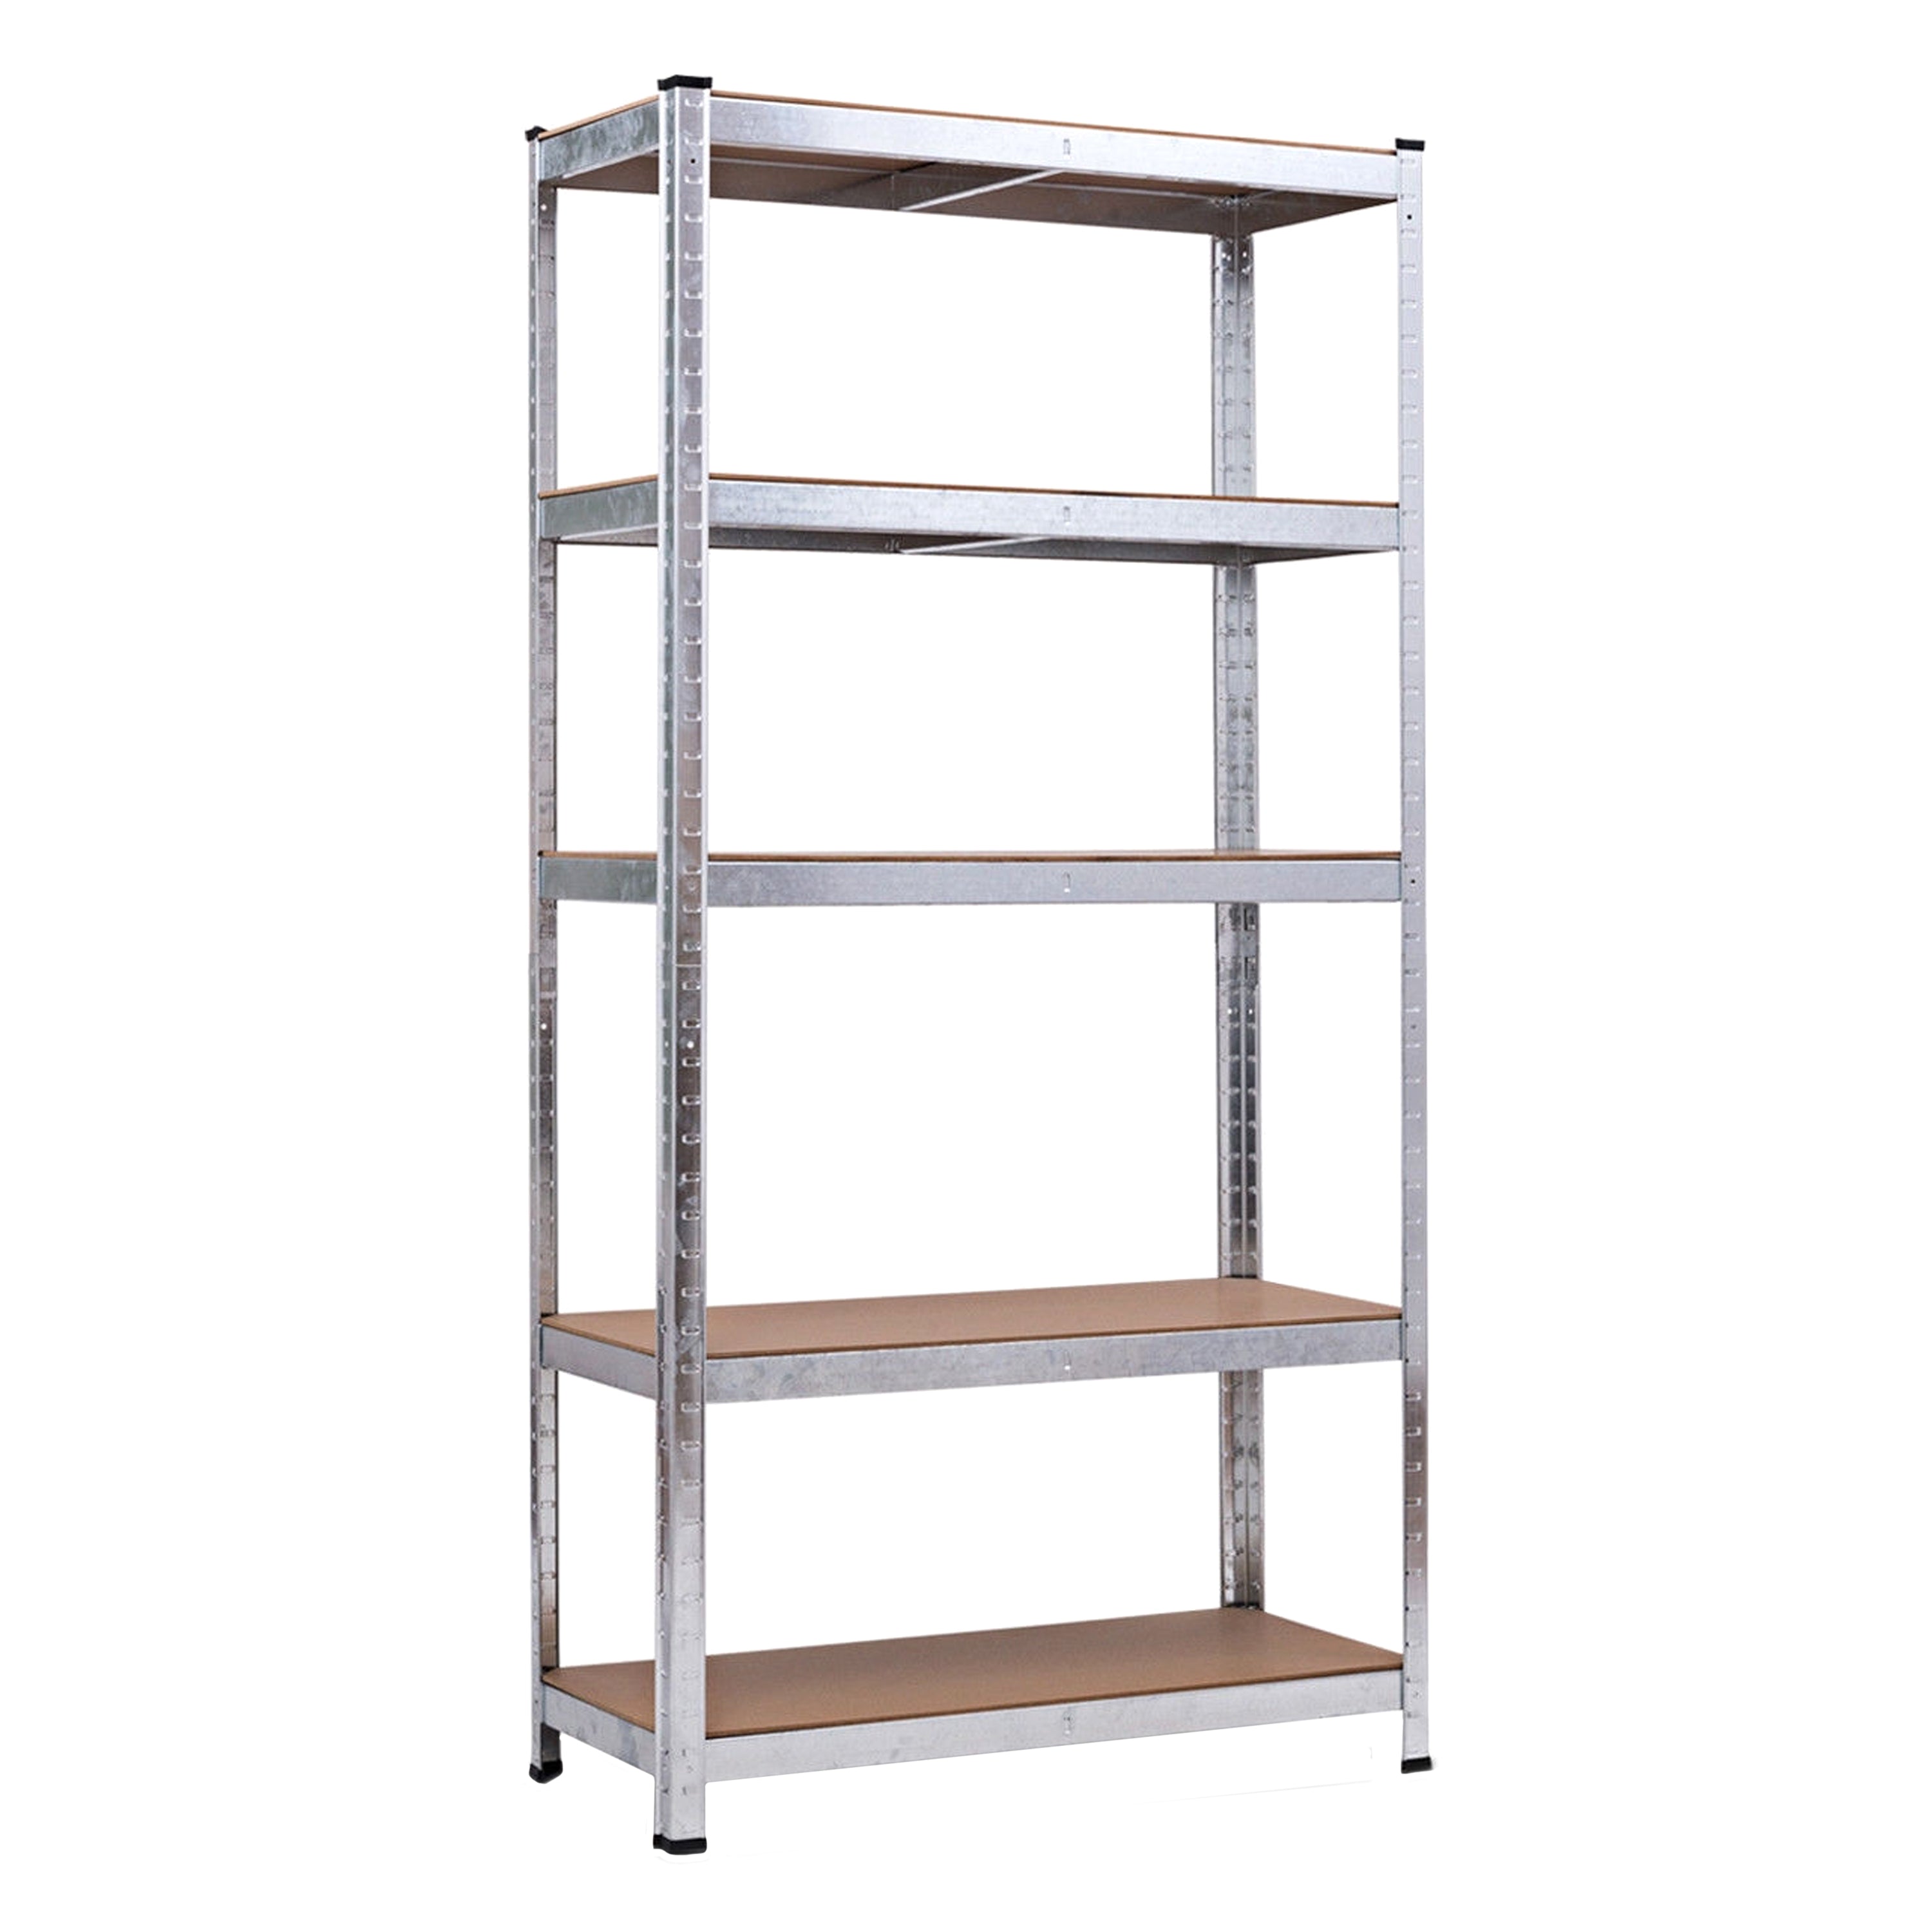 AMOS 5 Tier Heavy Duty Industrial Storage Shelving Units With Adjustable Shelf Height - Galvanized Steel or Black Powder Coated Frames